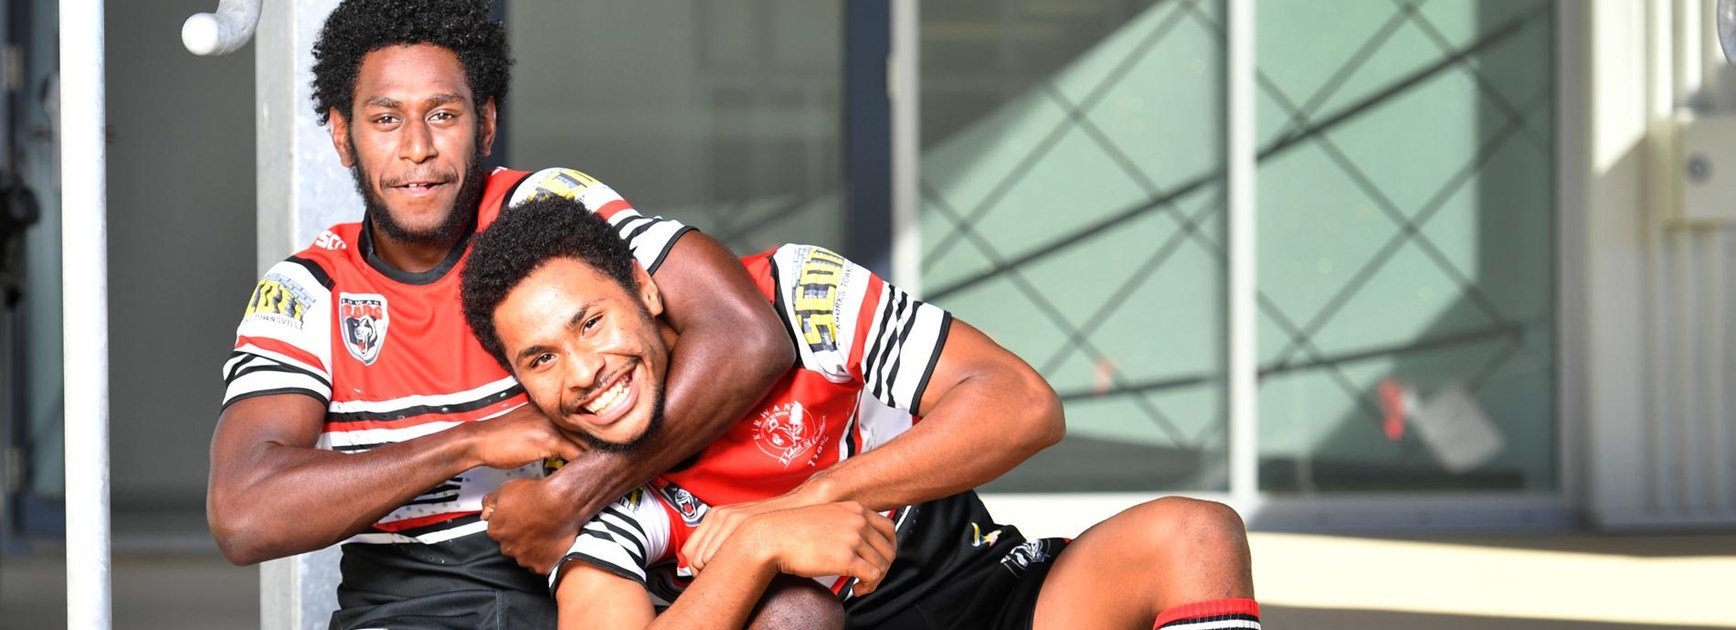 Dudley Dotoi and Ragarive Wavik starred for Kirwan State High School and Townsville Blackhawks in 2021. Photo: supplied